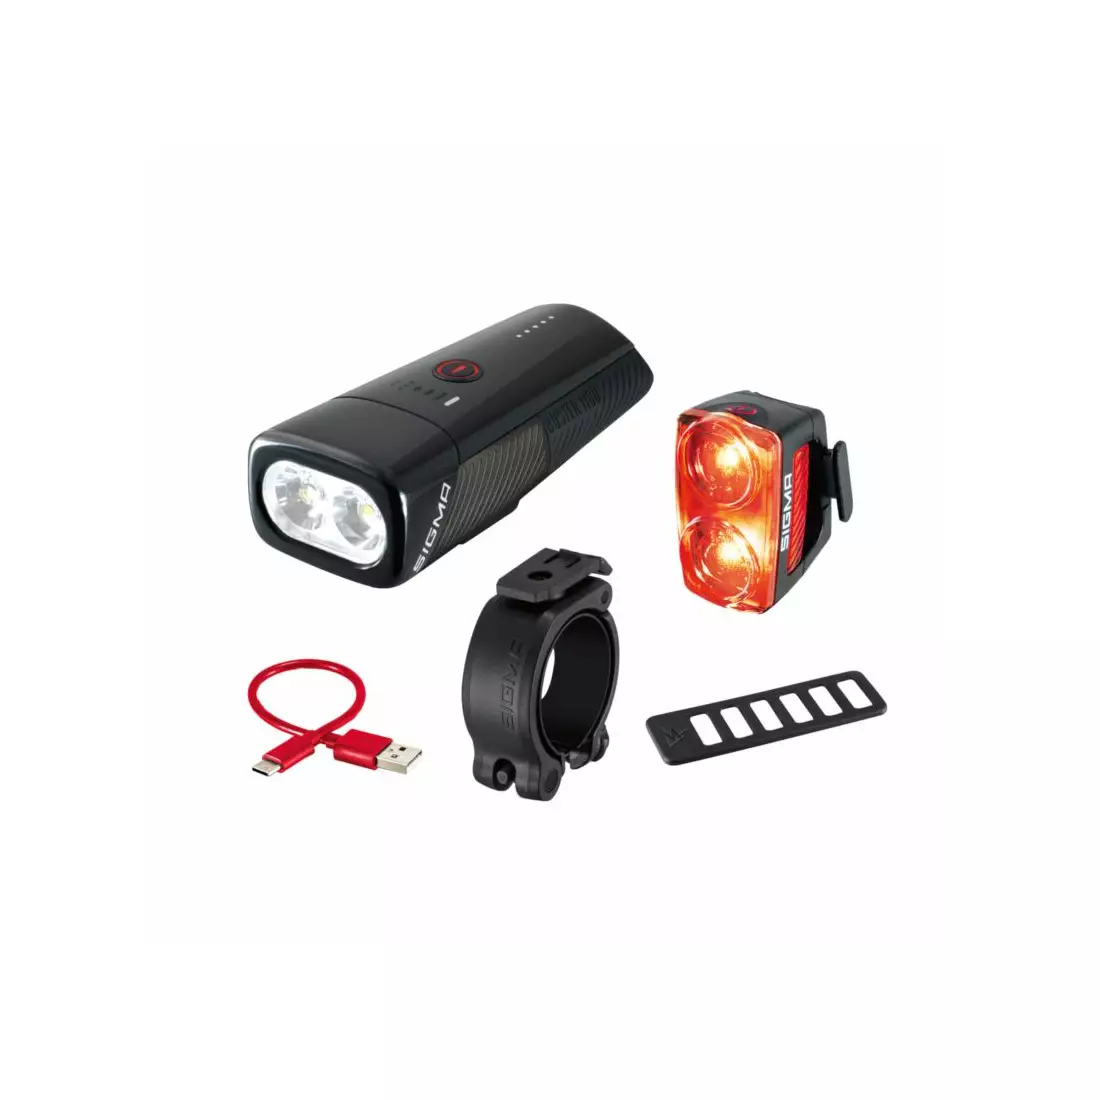 SIGMA set of bicycle lights front BUSTER 1100 + rear BUSTER RL150